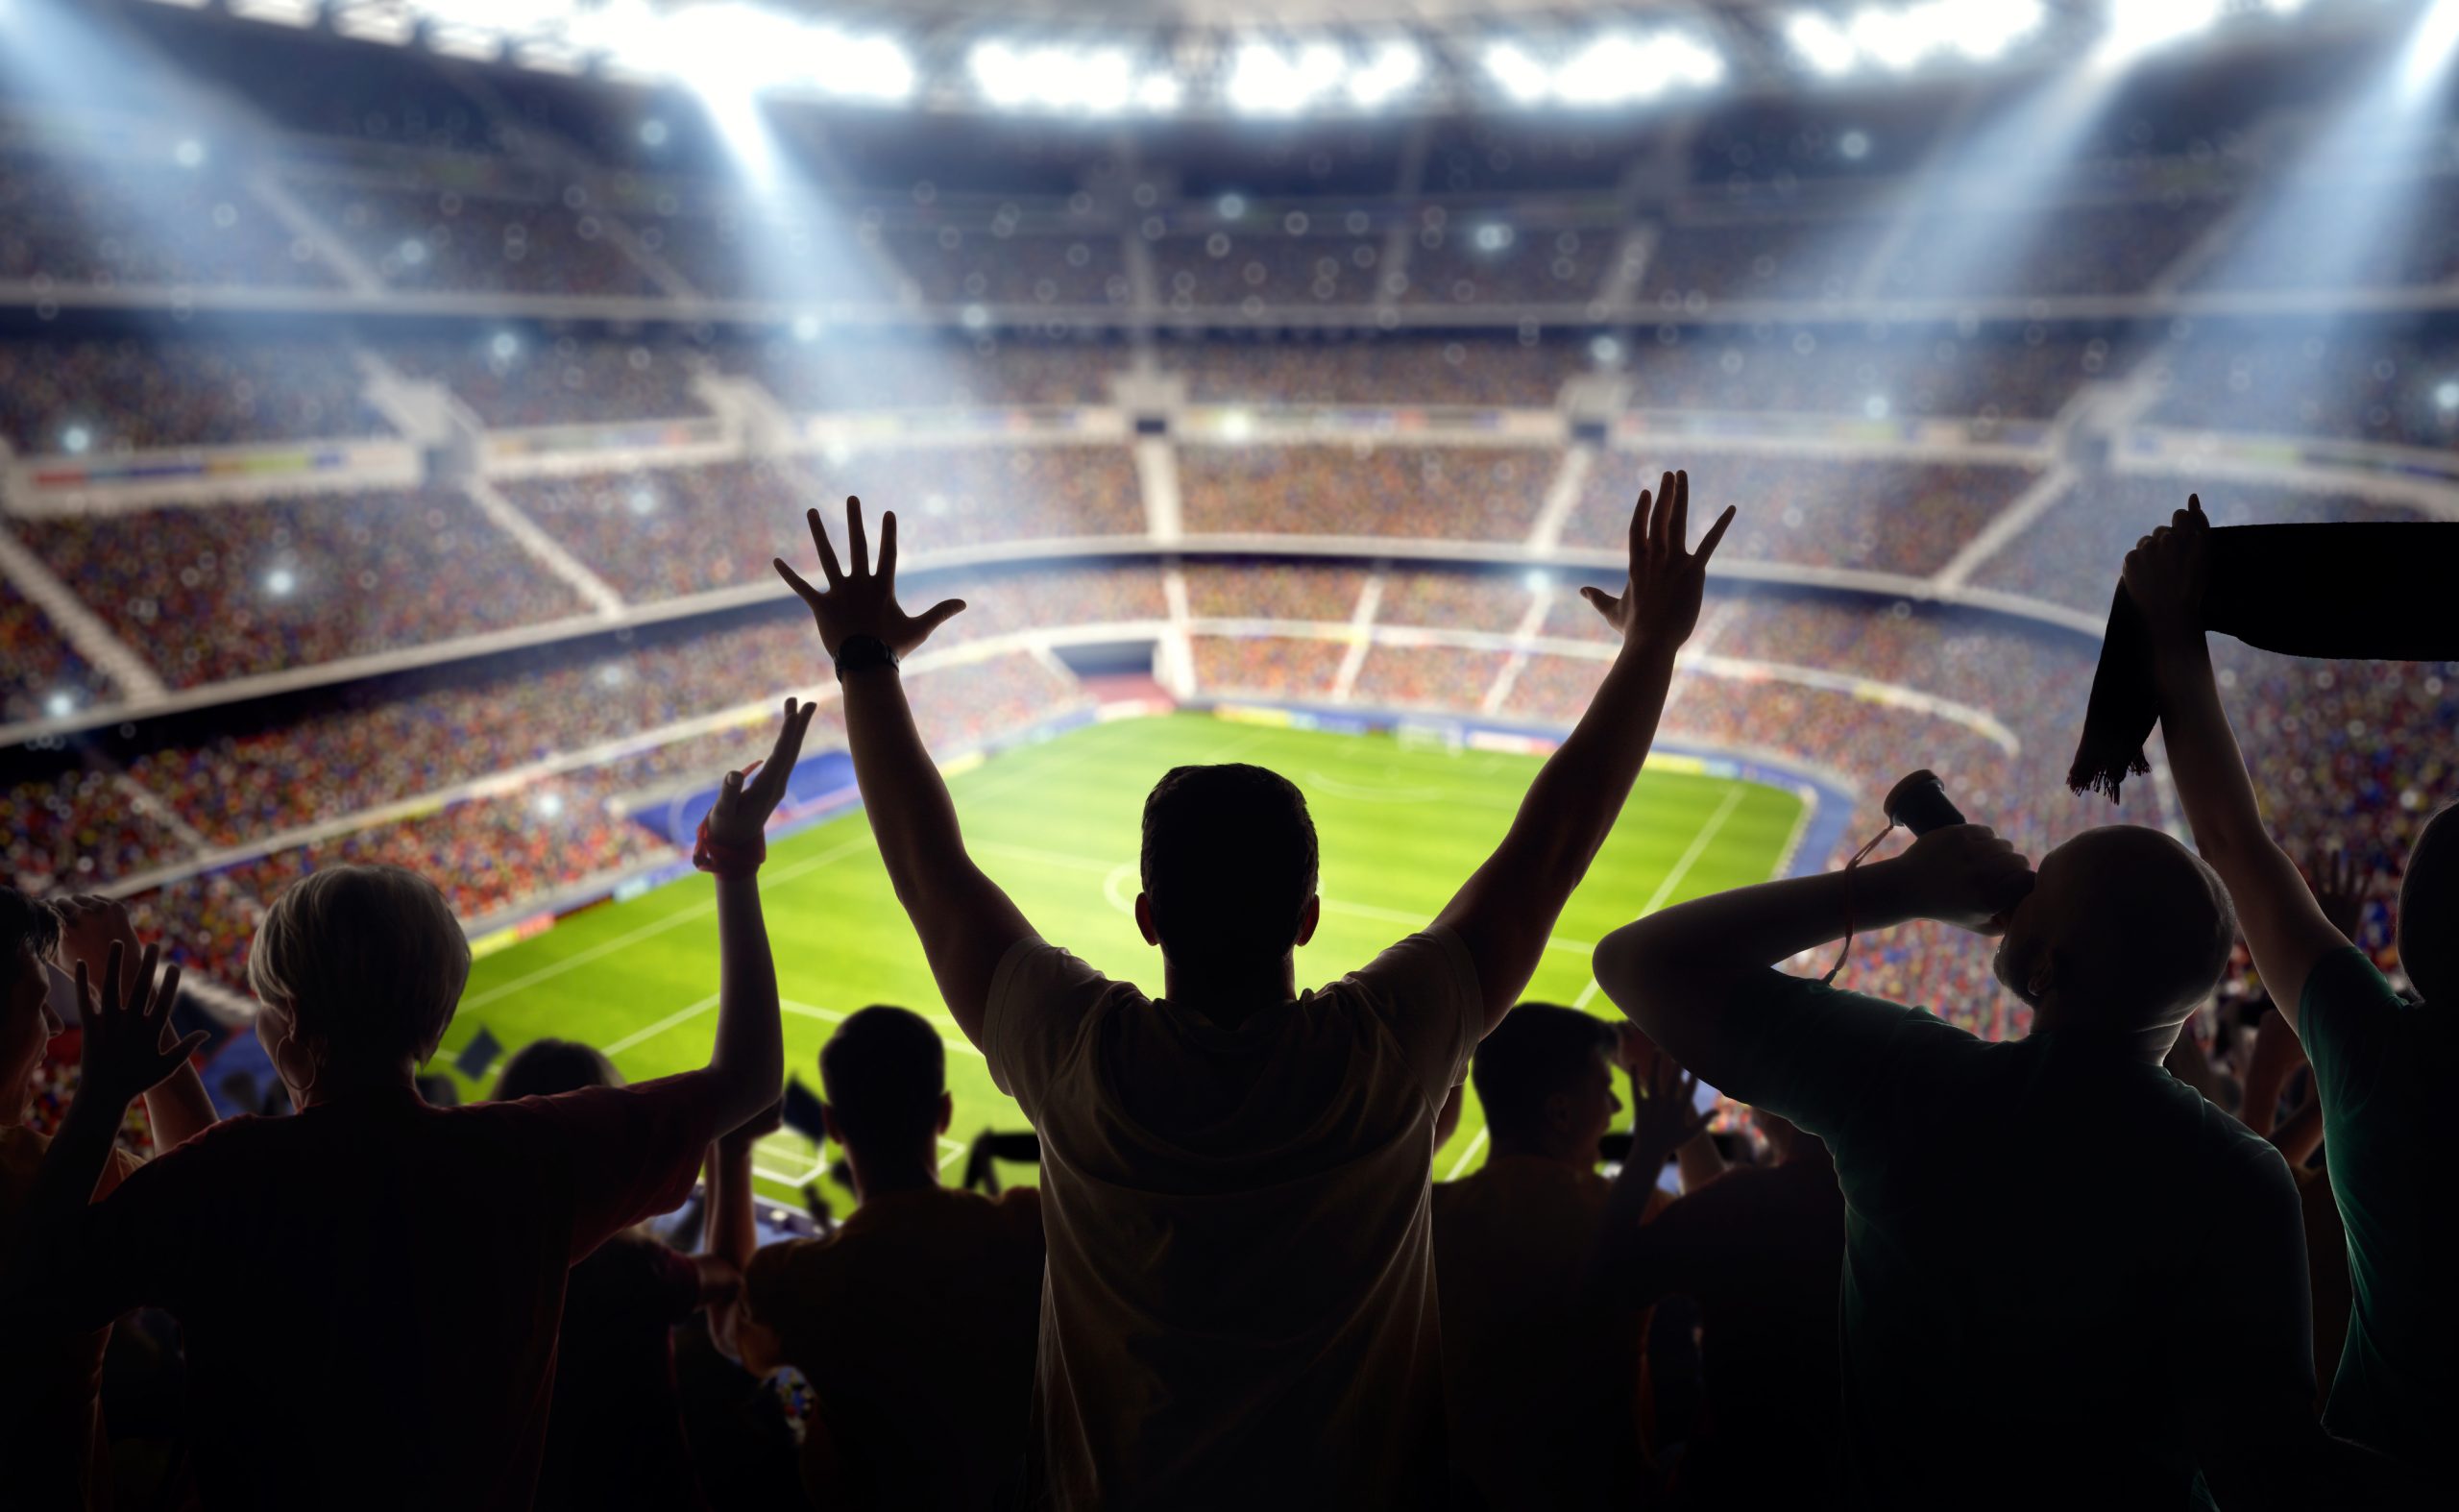 Would you rather be drinking wine at a football match?